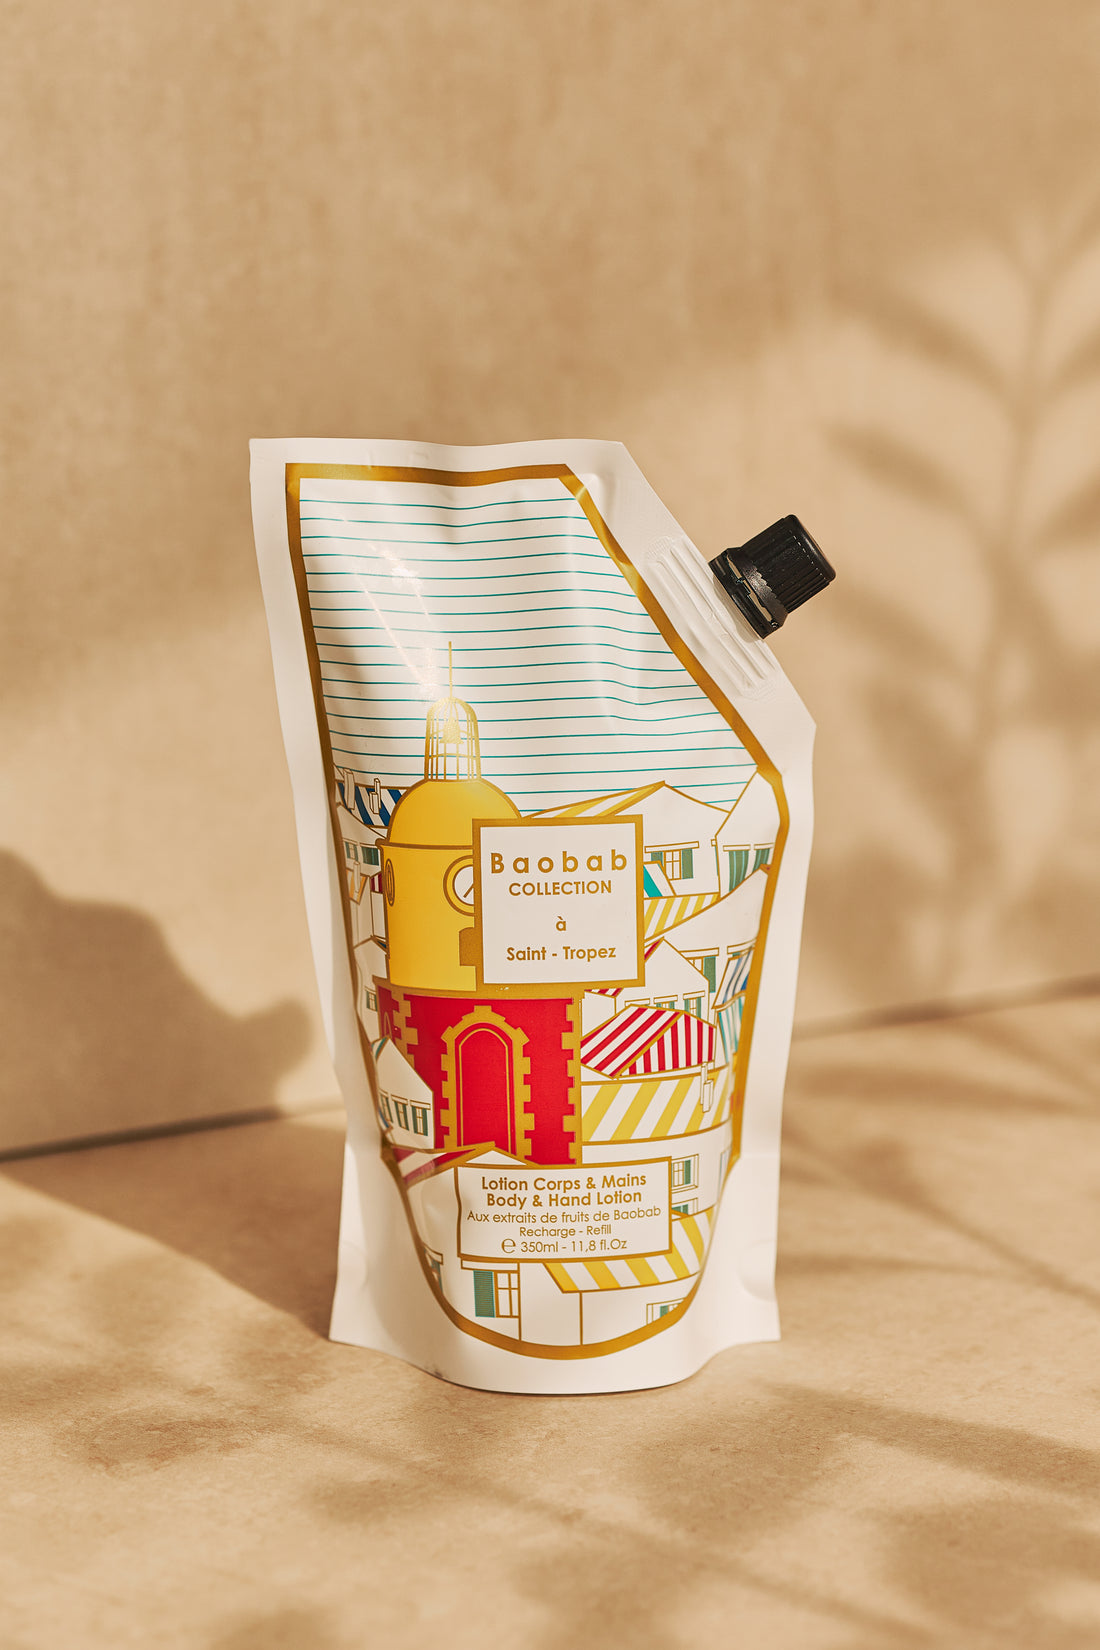 REFILL BODY & HAND LOTION A SAINT-TROPEZ - Baobab Collection